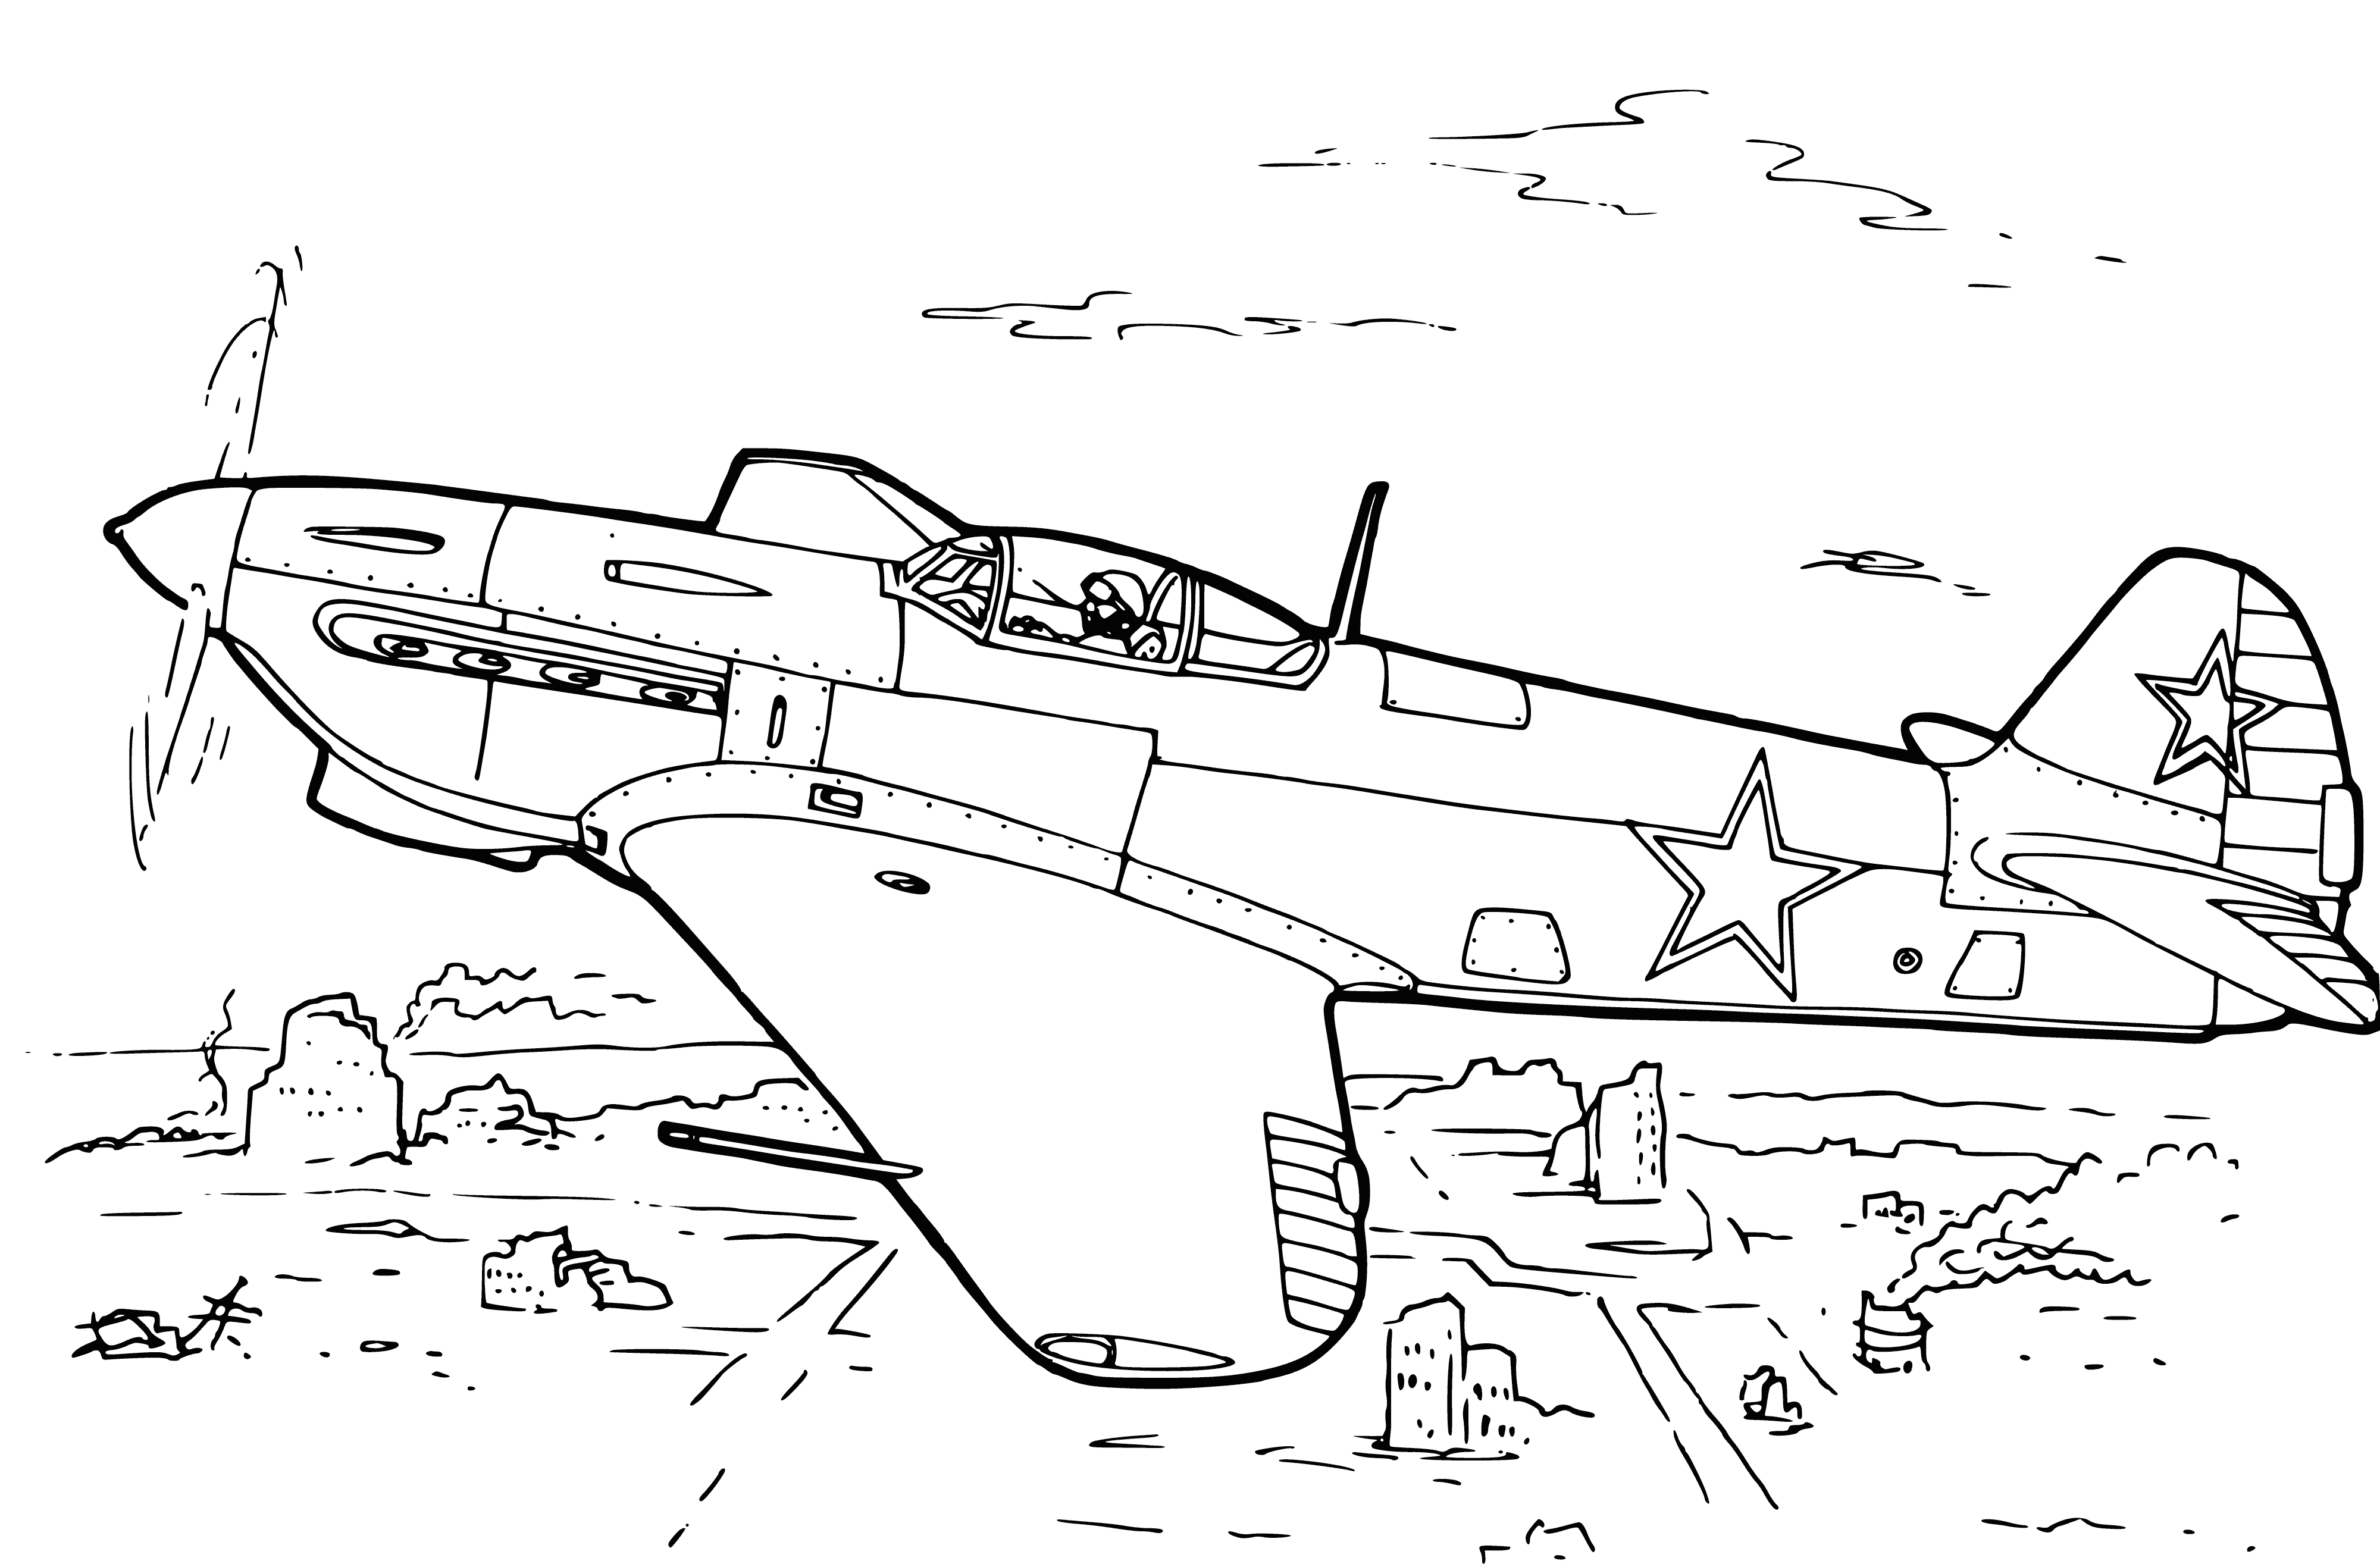 coloring page: A gray airplane with a long nose & downward angled wings flying with a pilot in the cockpit & bombs under the wings. #aviation